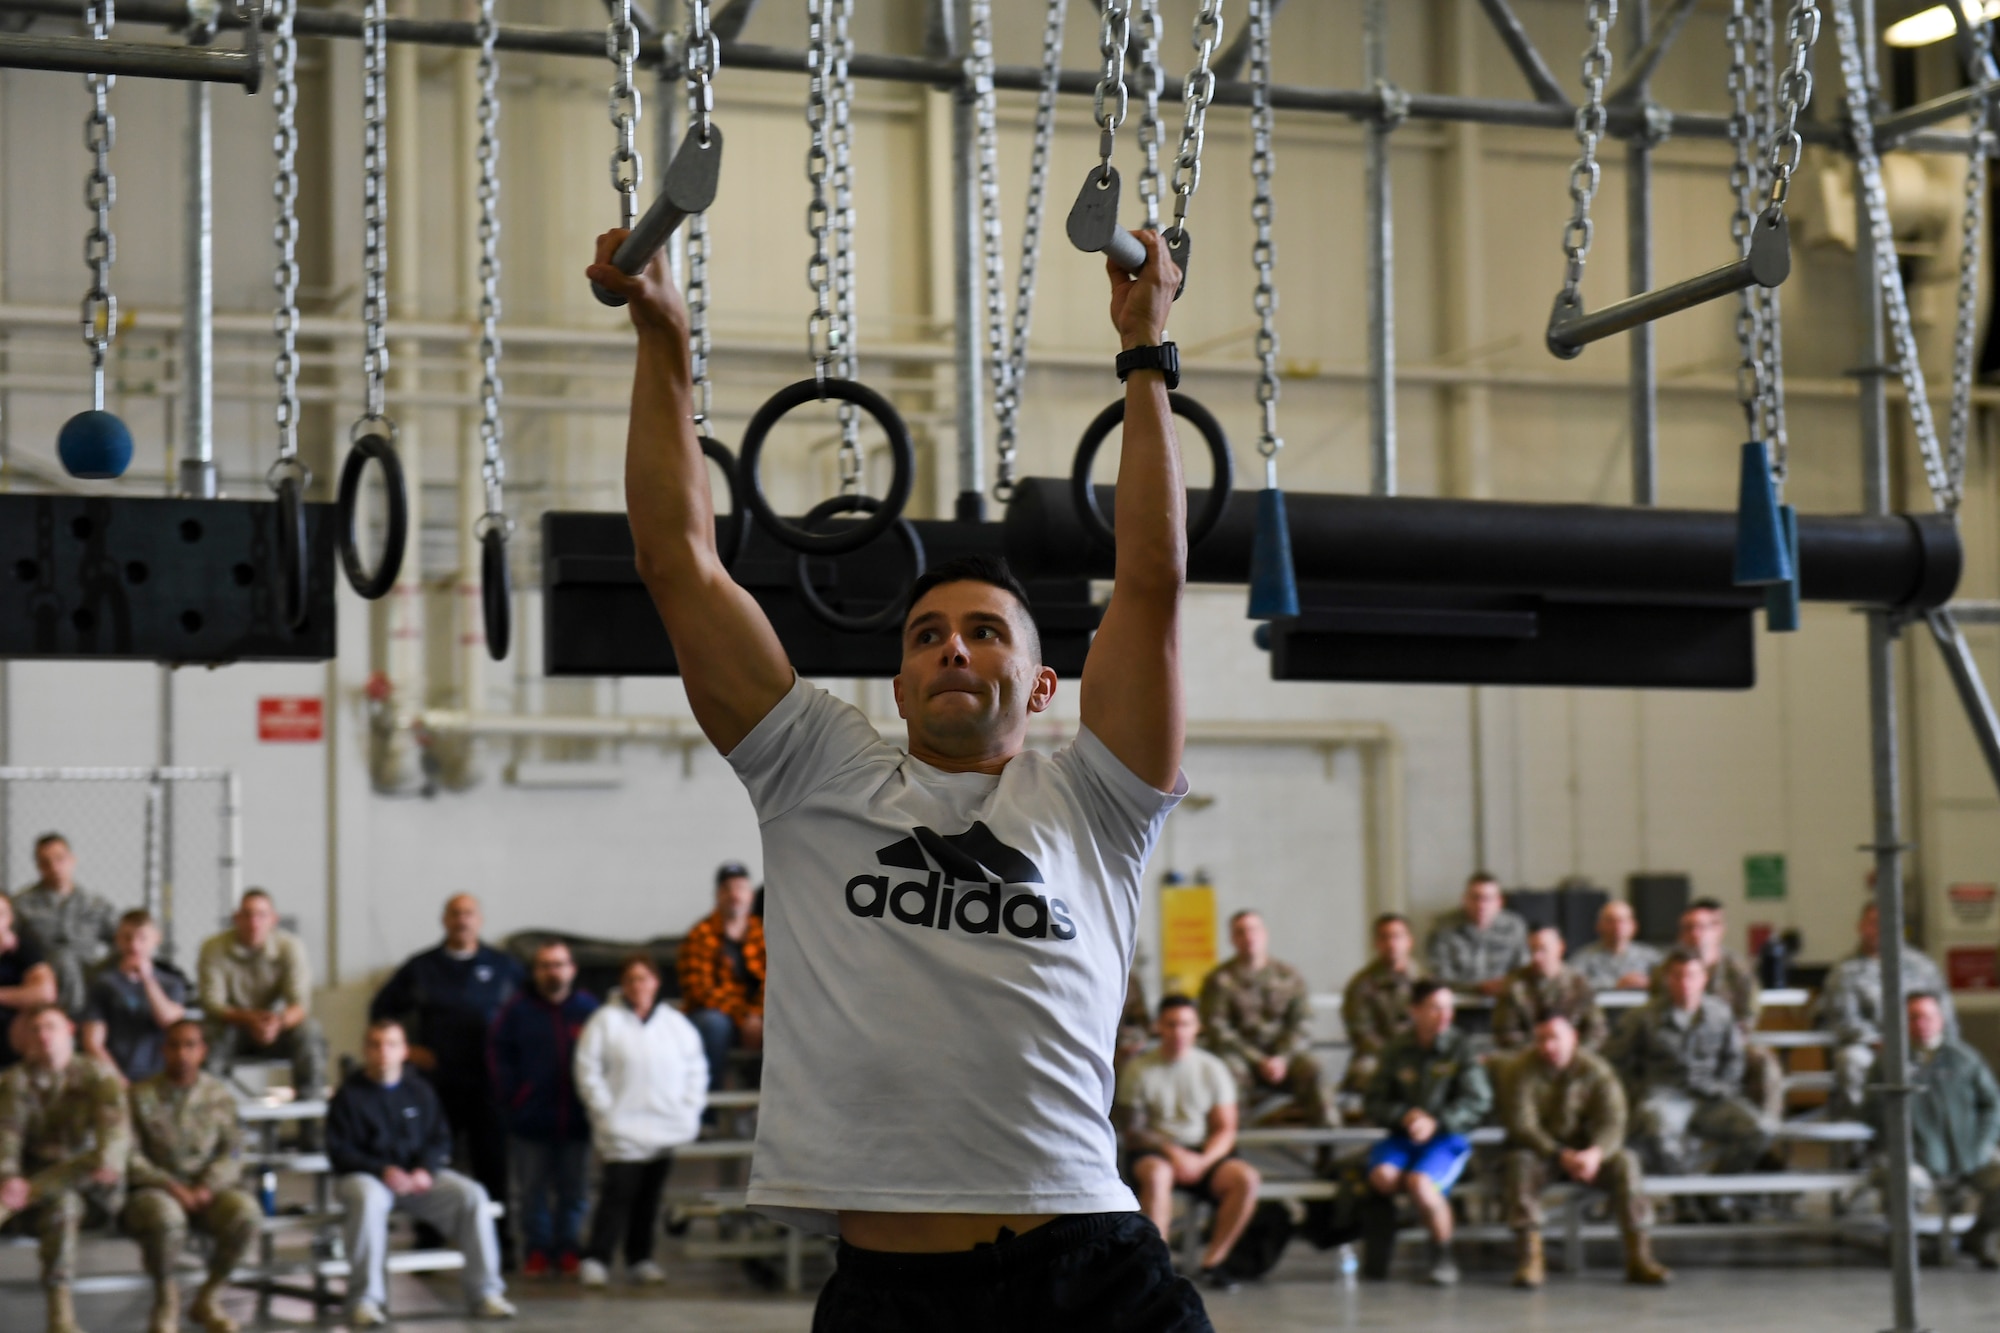 An Airman with the 911th Airlift Wing participates in a time challenge using the Alpha Warrior Battle Rig at the Pittsburgh International Airport Air Reserve Station, Pennsylvania, October 14, 2018. The battle rig is designed to meet all four of the Comprehensive Airman Fitness model's pillars: mental, physical, social and spiritual. (U.S. Air Force photo by Senior Airman Beth Kobily)